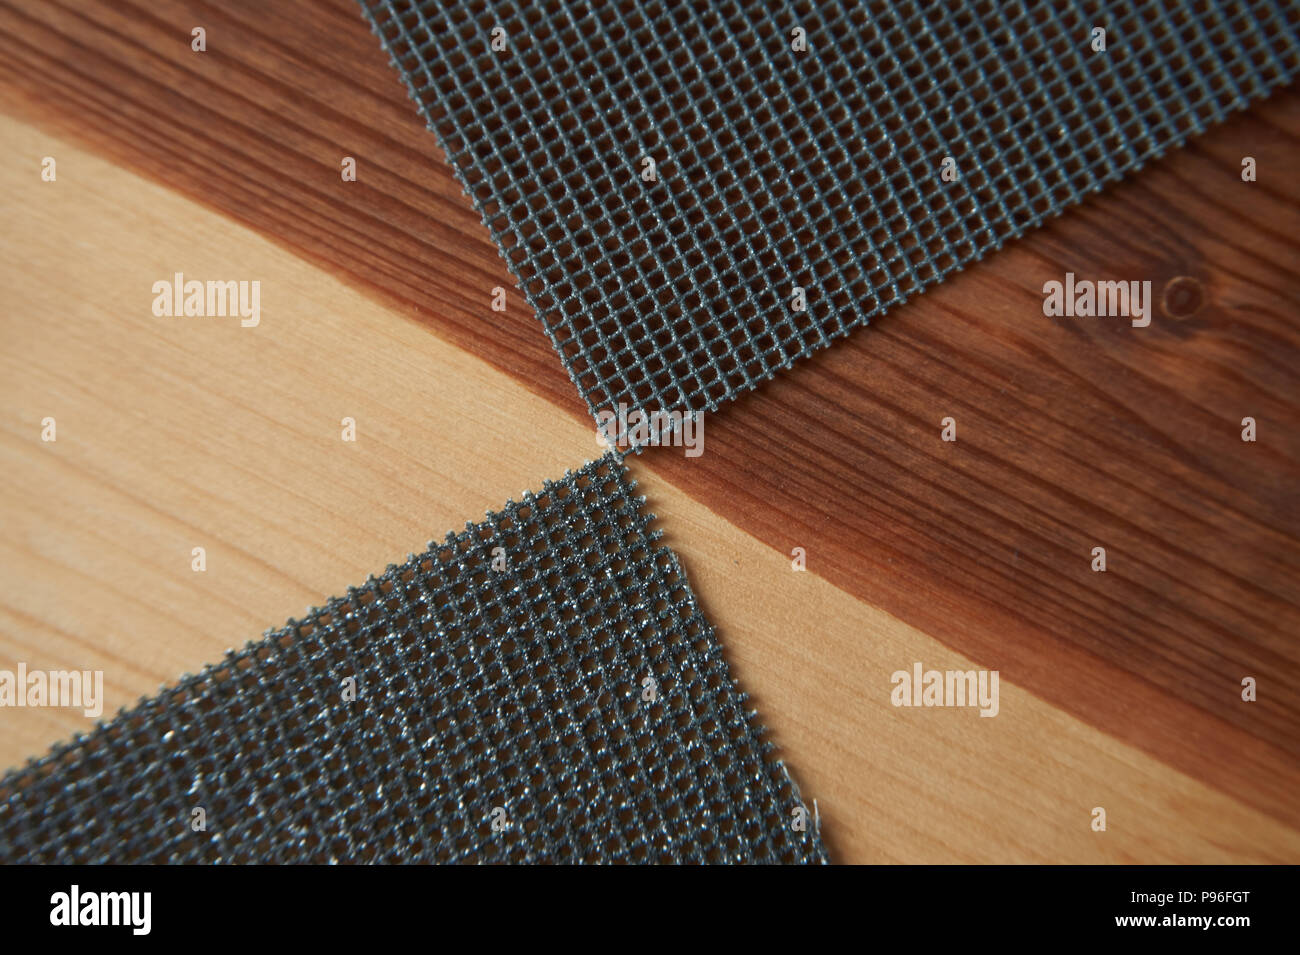 Sanding sheets on a wooden surface. Close-up abrasive equipment with copy space Stock Photo